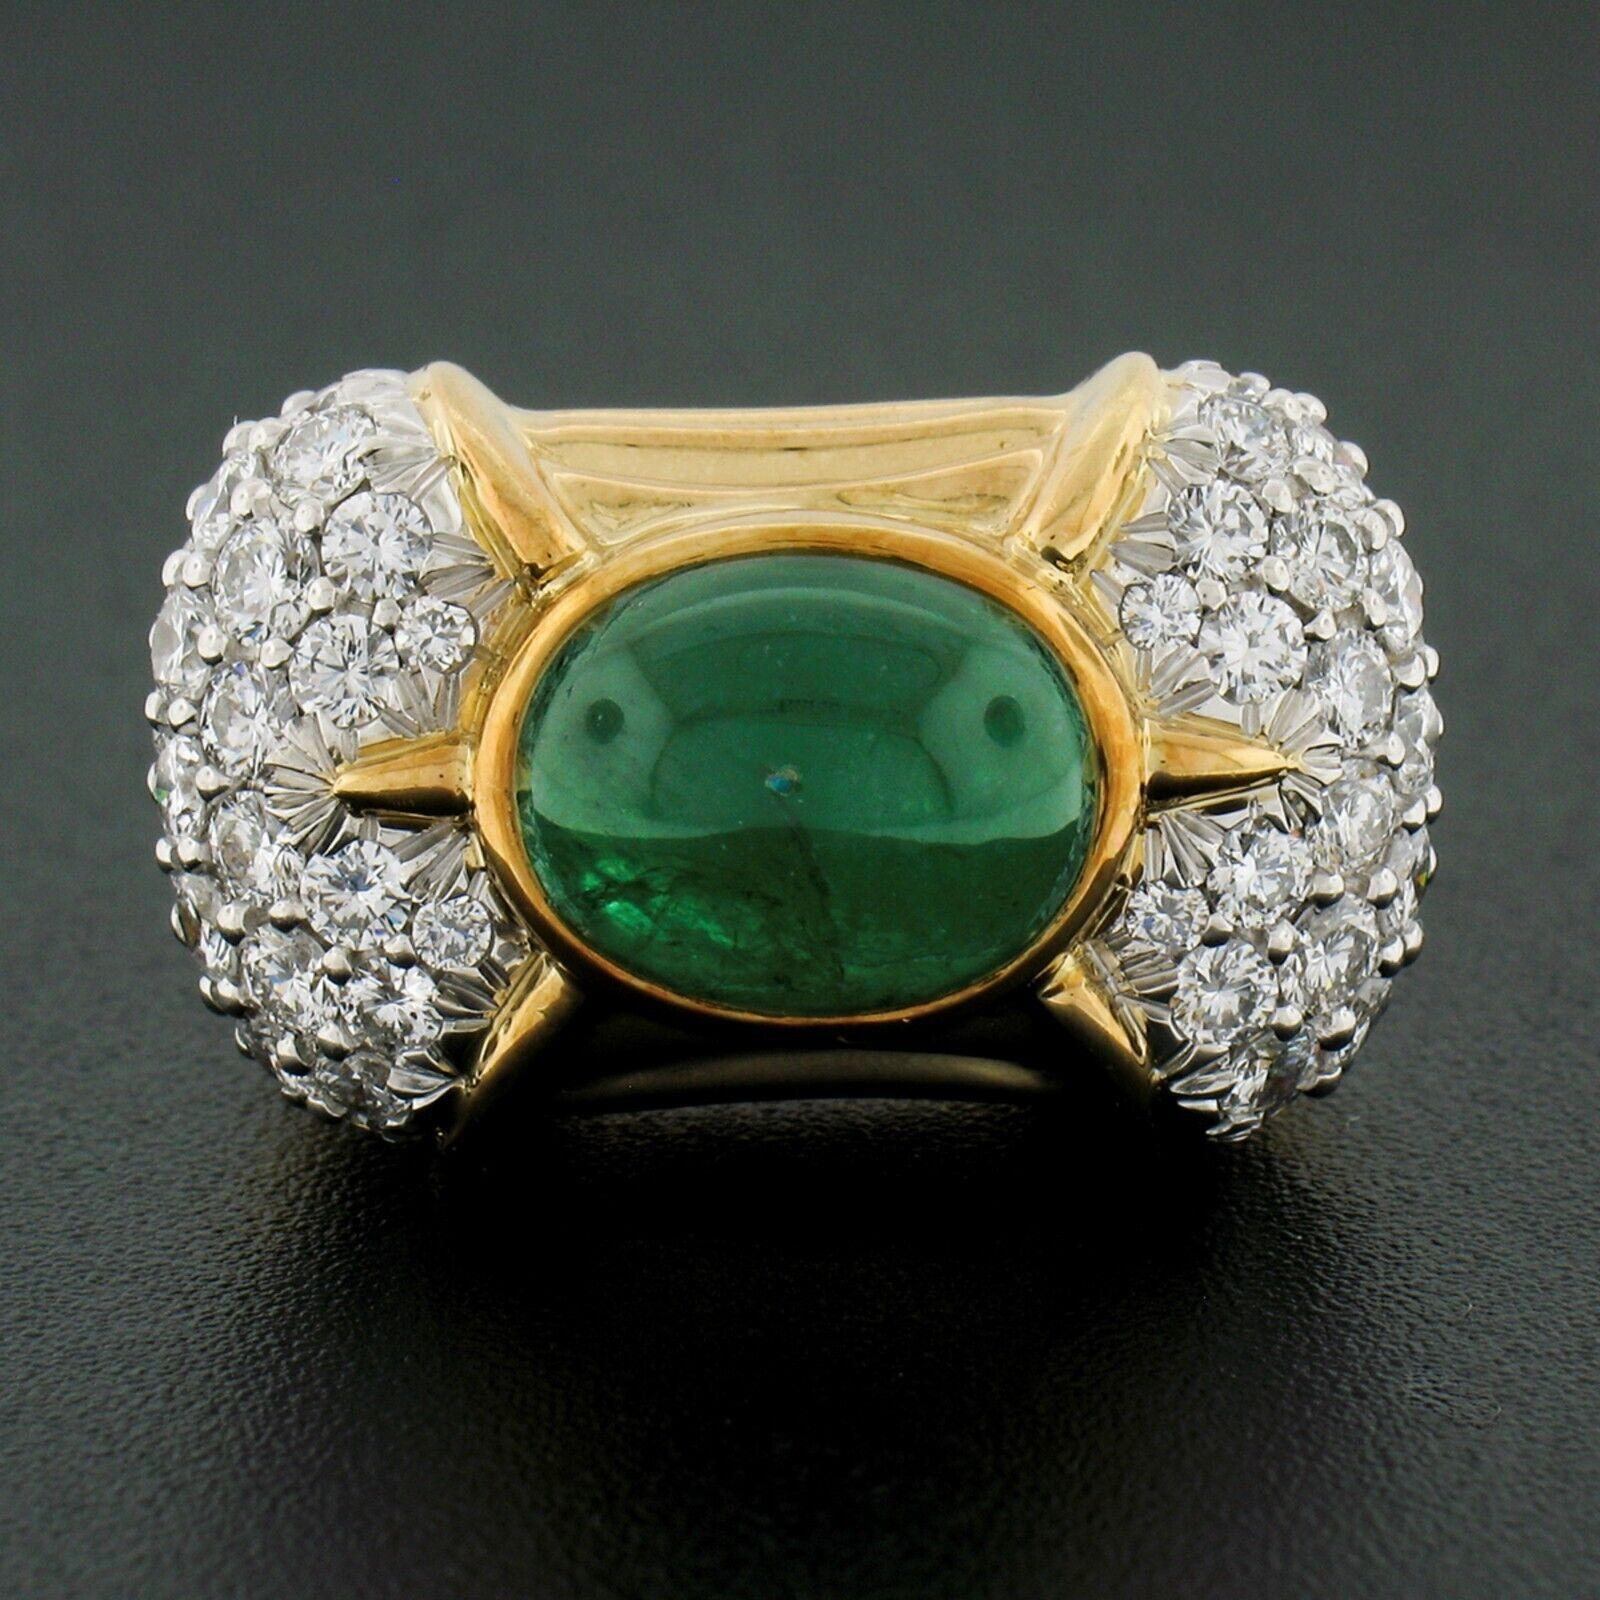 This large, gorgeous cocktail ring was crafted in solid 18k yellow gold and features a magnificent, GIA certified, natural emerald neatly bezel set set at the center of the puffed top. This oval cabochon cut emerald has a fantastic, deep, and vivid